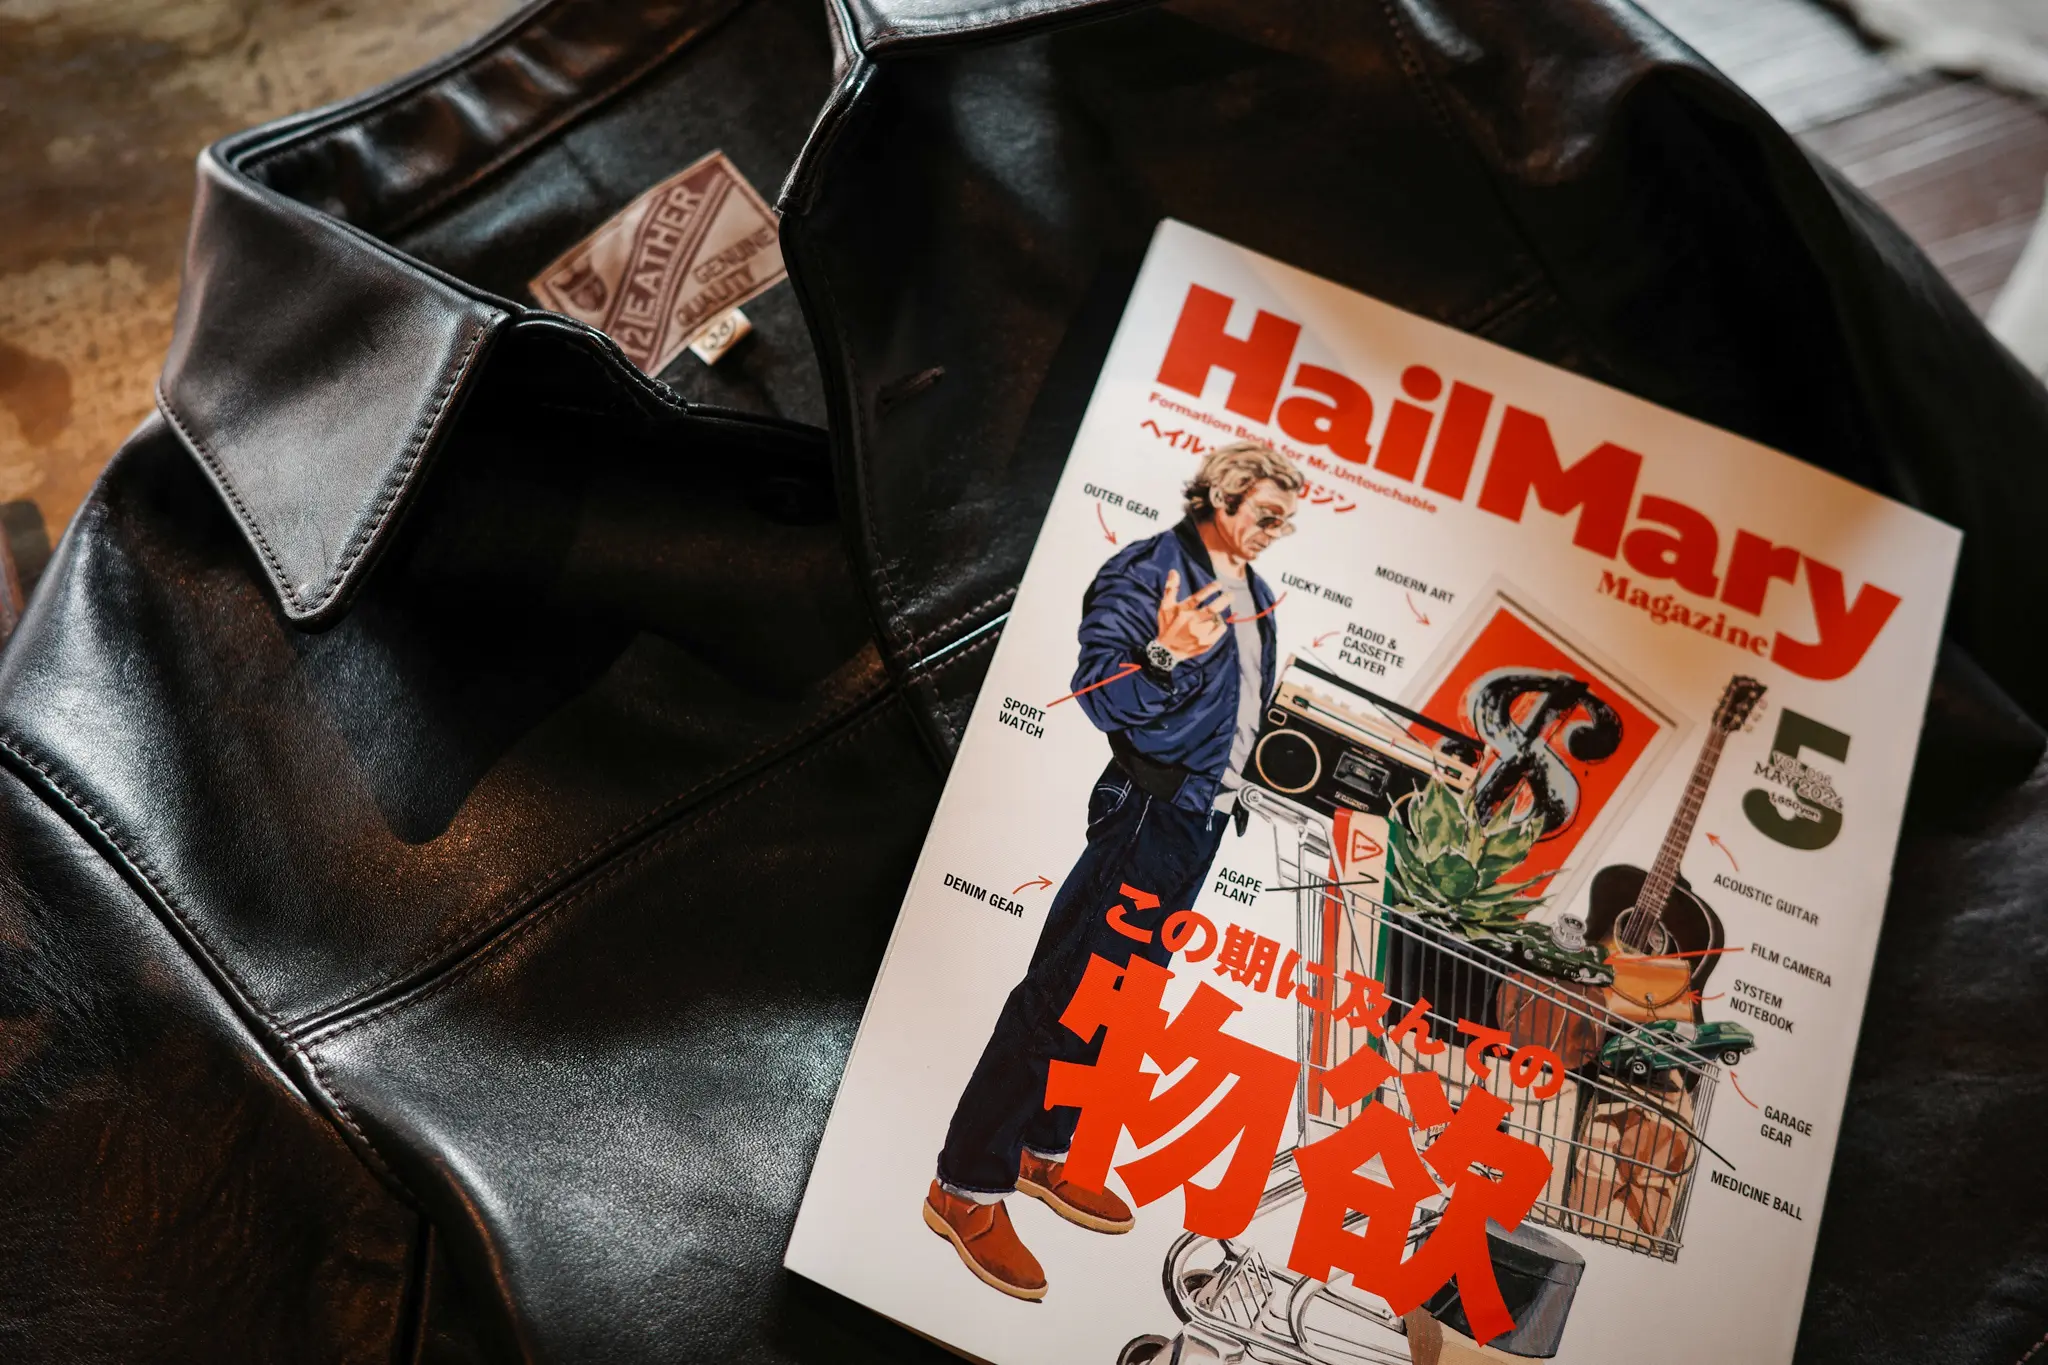 Published in the May issue of HailMary Magazine leather jacket brand